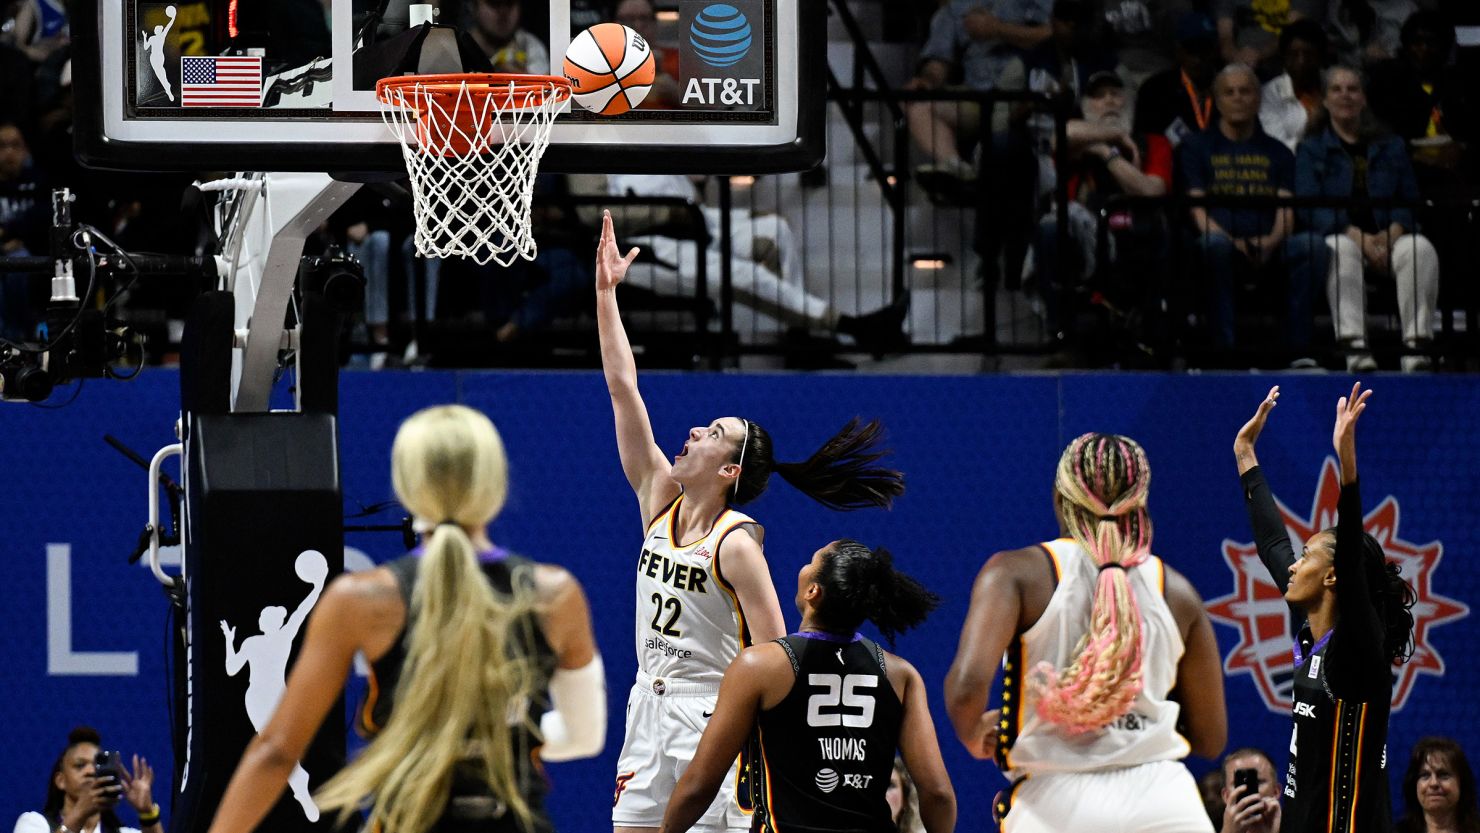 Indiana Fever guard Caitlin Clark scores her first WNBA regular season basket against during a game against the Connecticut Sun in Uncasville, Connecticut on Tuesday, May 14.